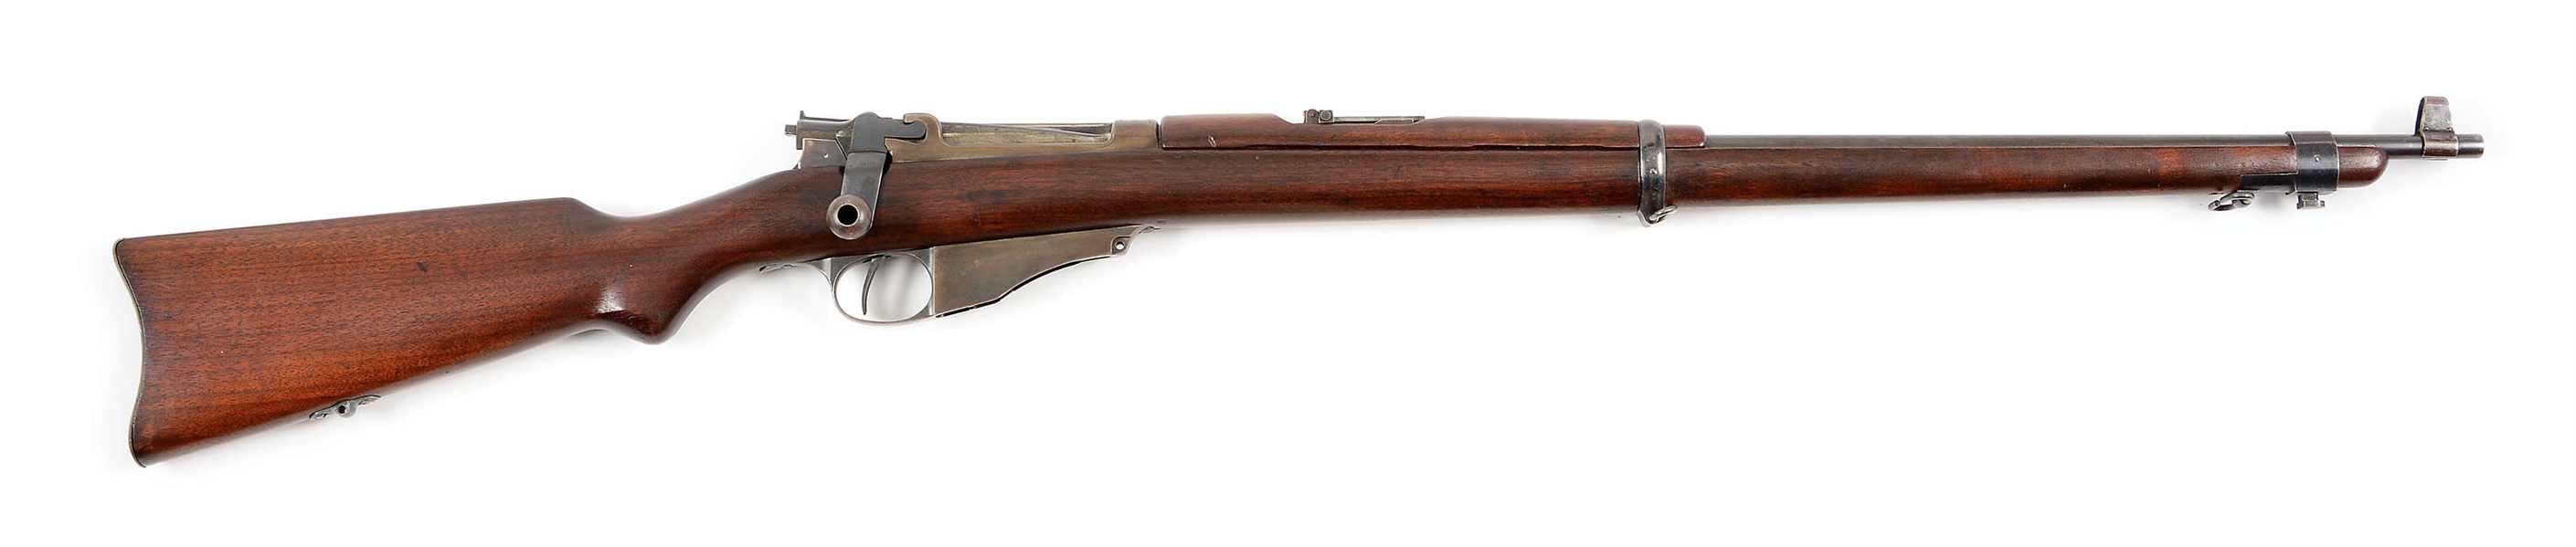 (A) U.S. NAVY MARKED WINCHESTER 1895 LEE STRAIGHT PULL BOLT ACTION RIFLE.